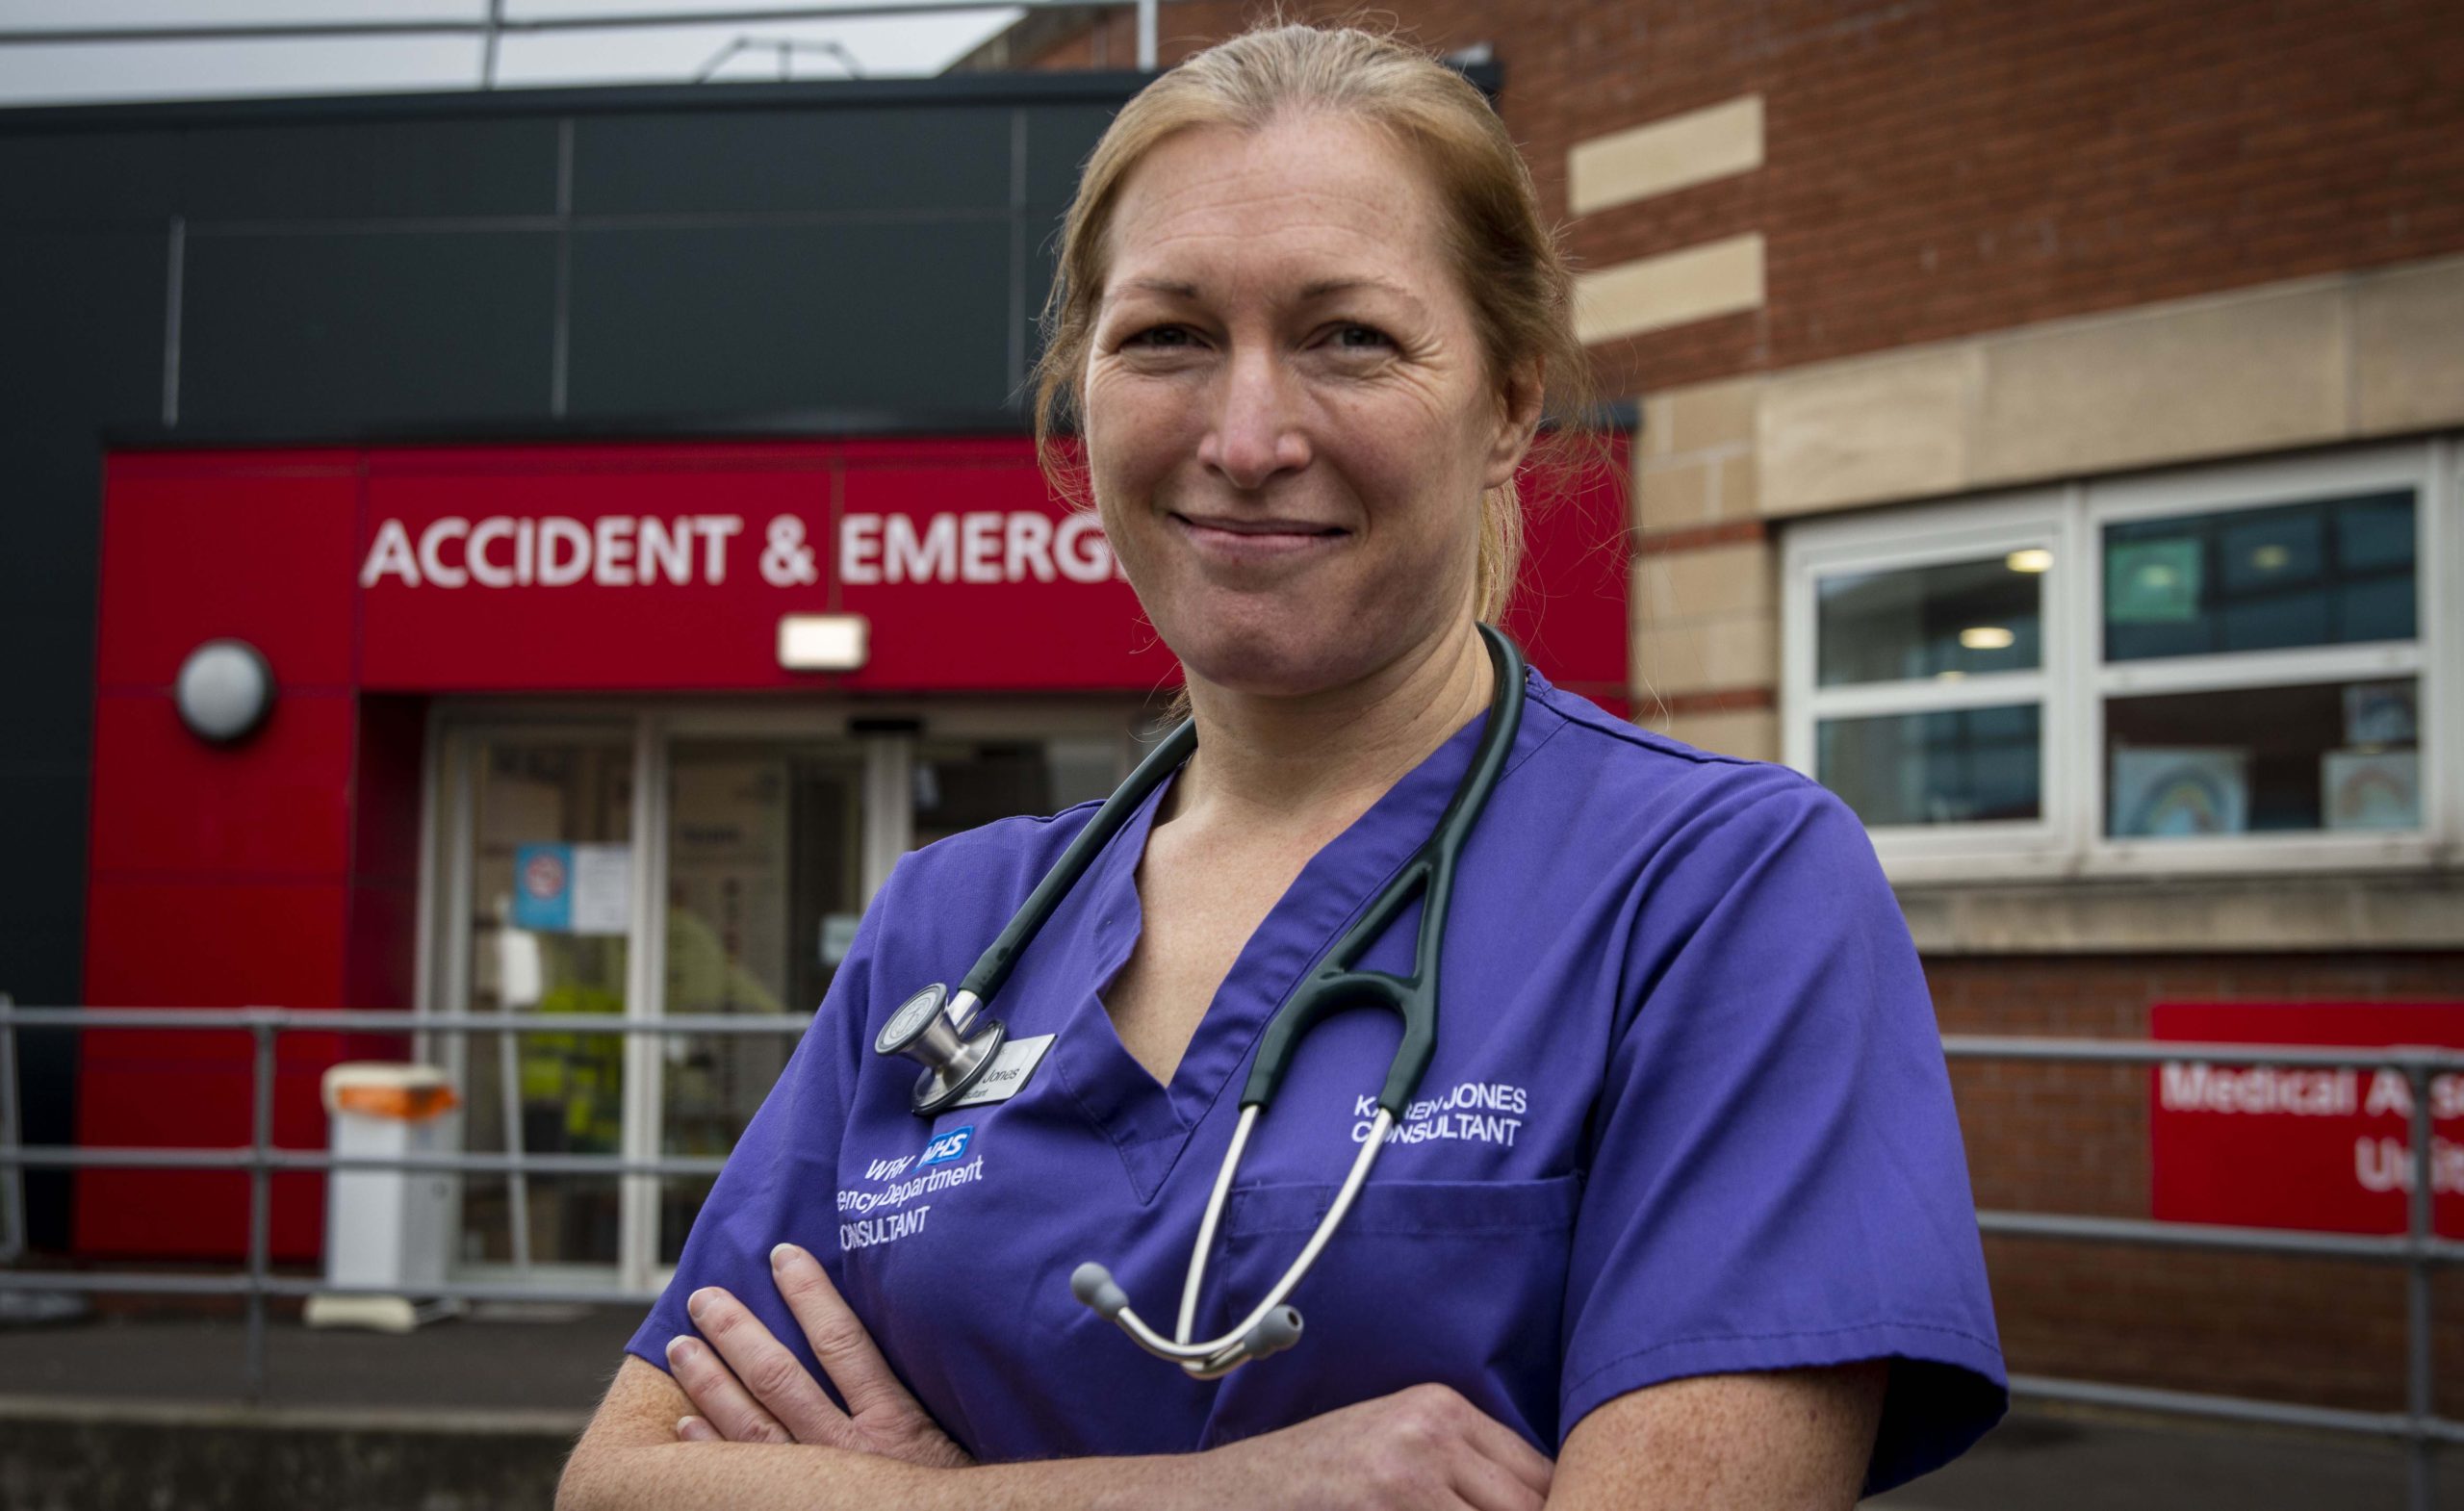 Karen Jones the former England rugby star now tackling busy Emergency Department